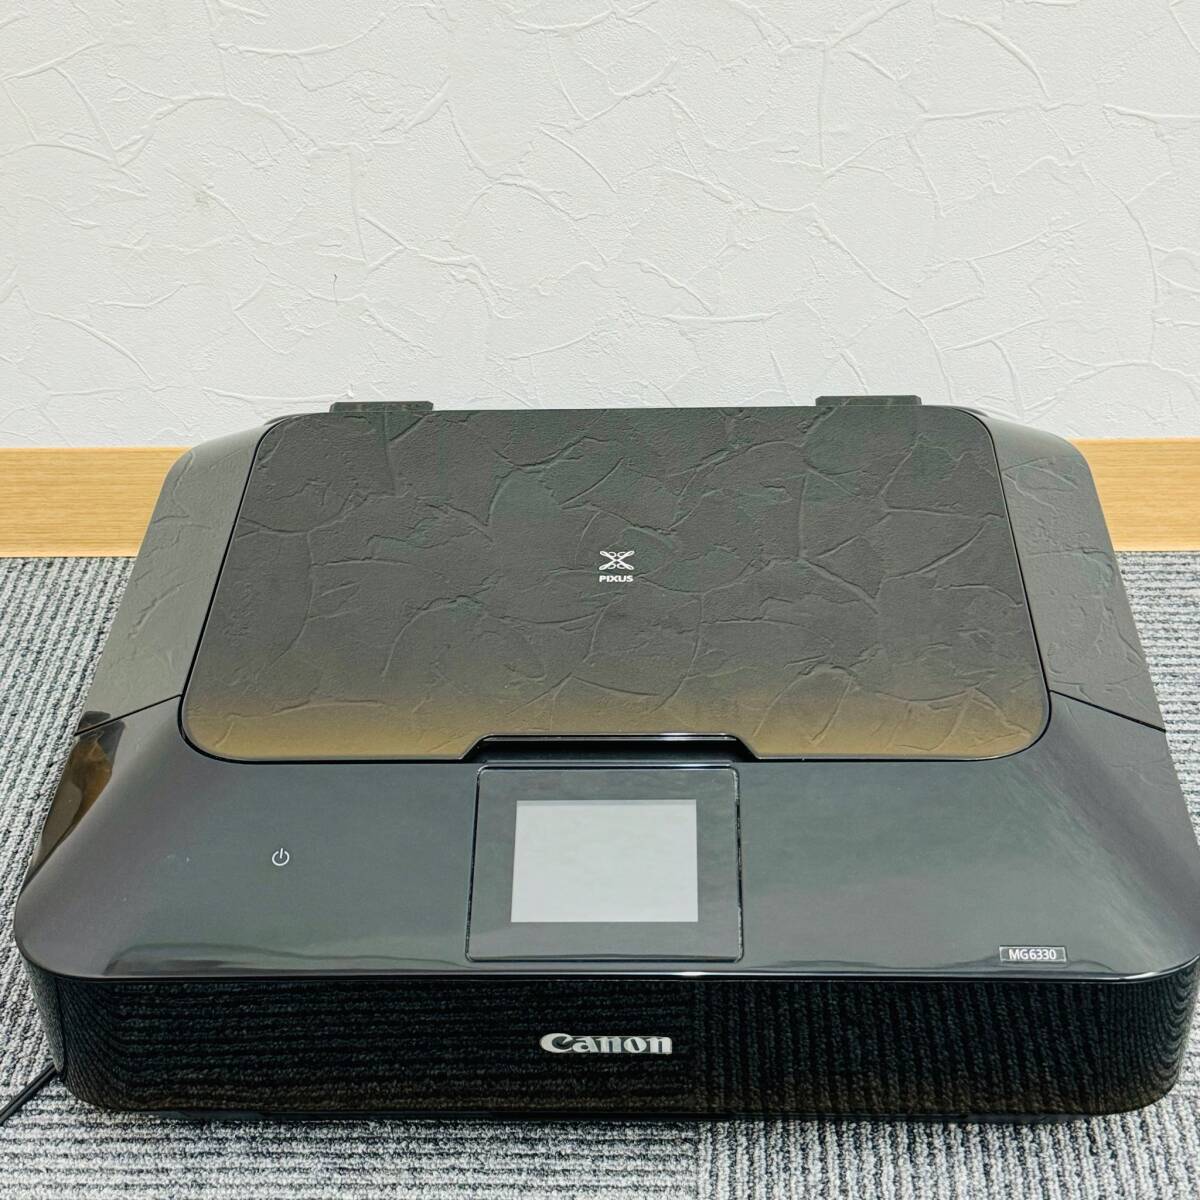 Canon Canon PIXUS MG6330 ink-jet printer multifunction machine secondhand goods electrification verification 0 use impression equipped operation not yet verification present condition goods part removing 8059